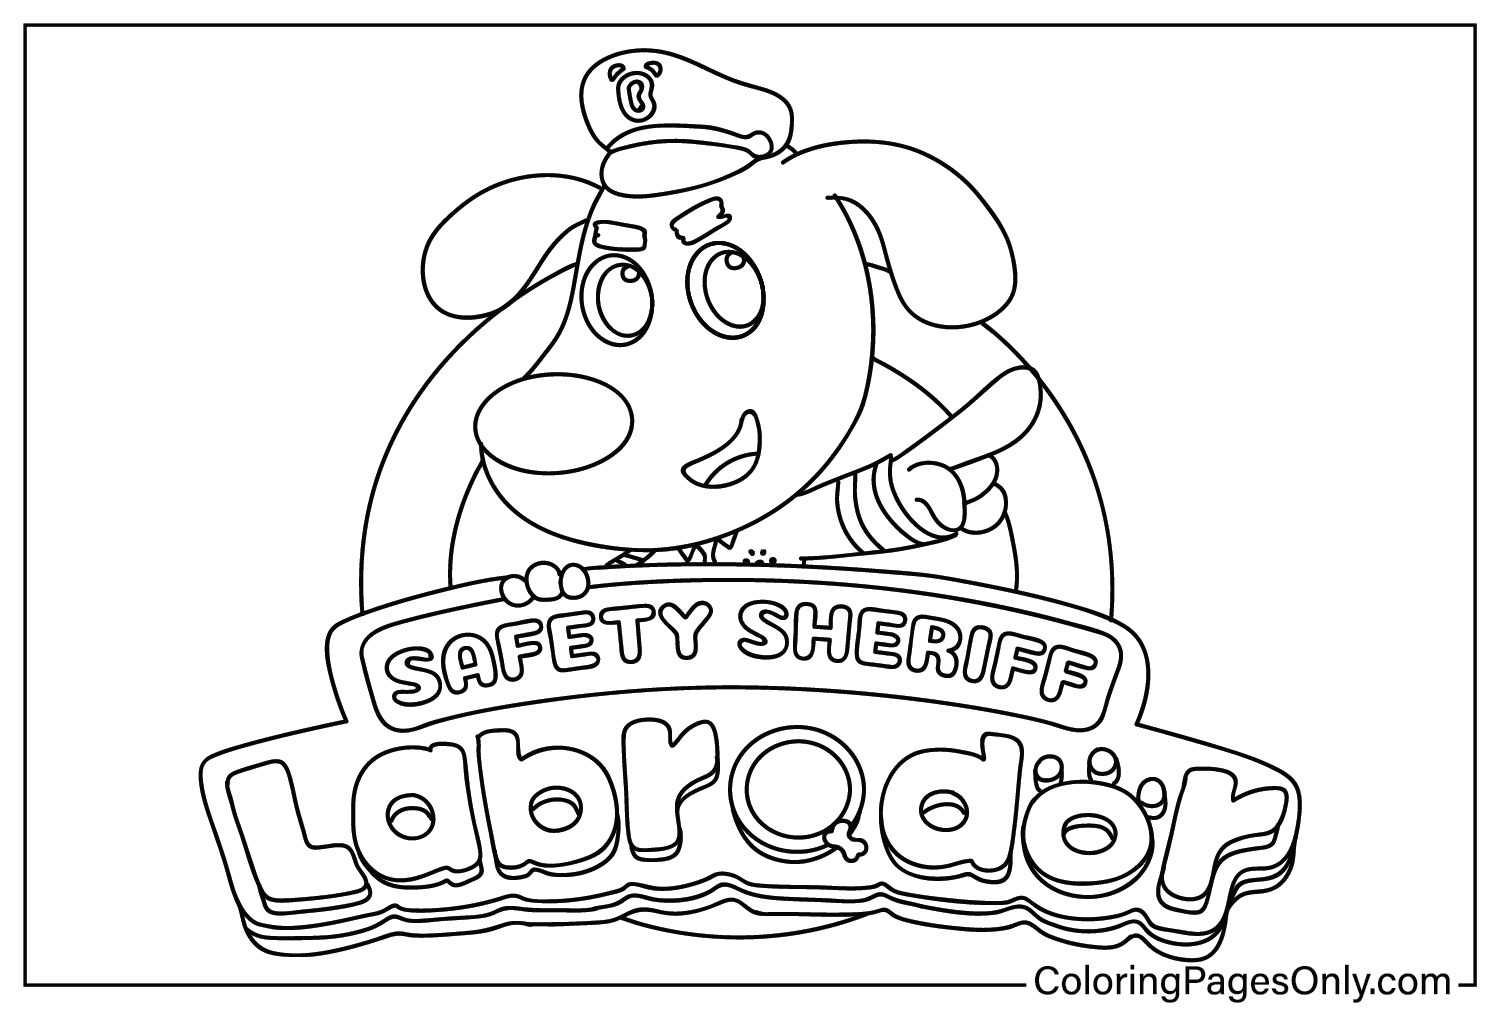 Safety Sheriff Labrador Images to Color from Safety Sheriff Labrador